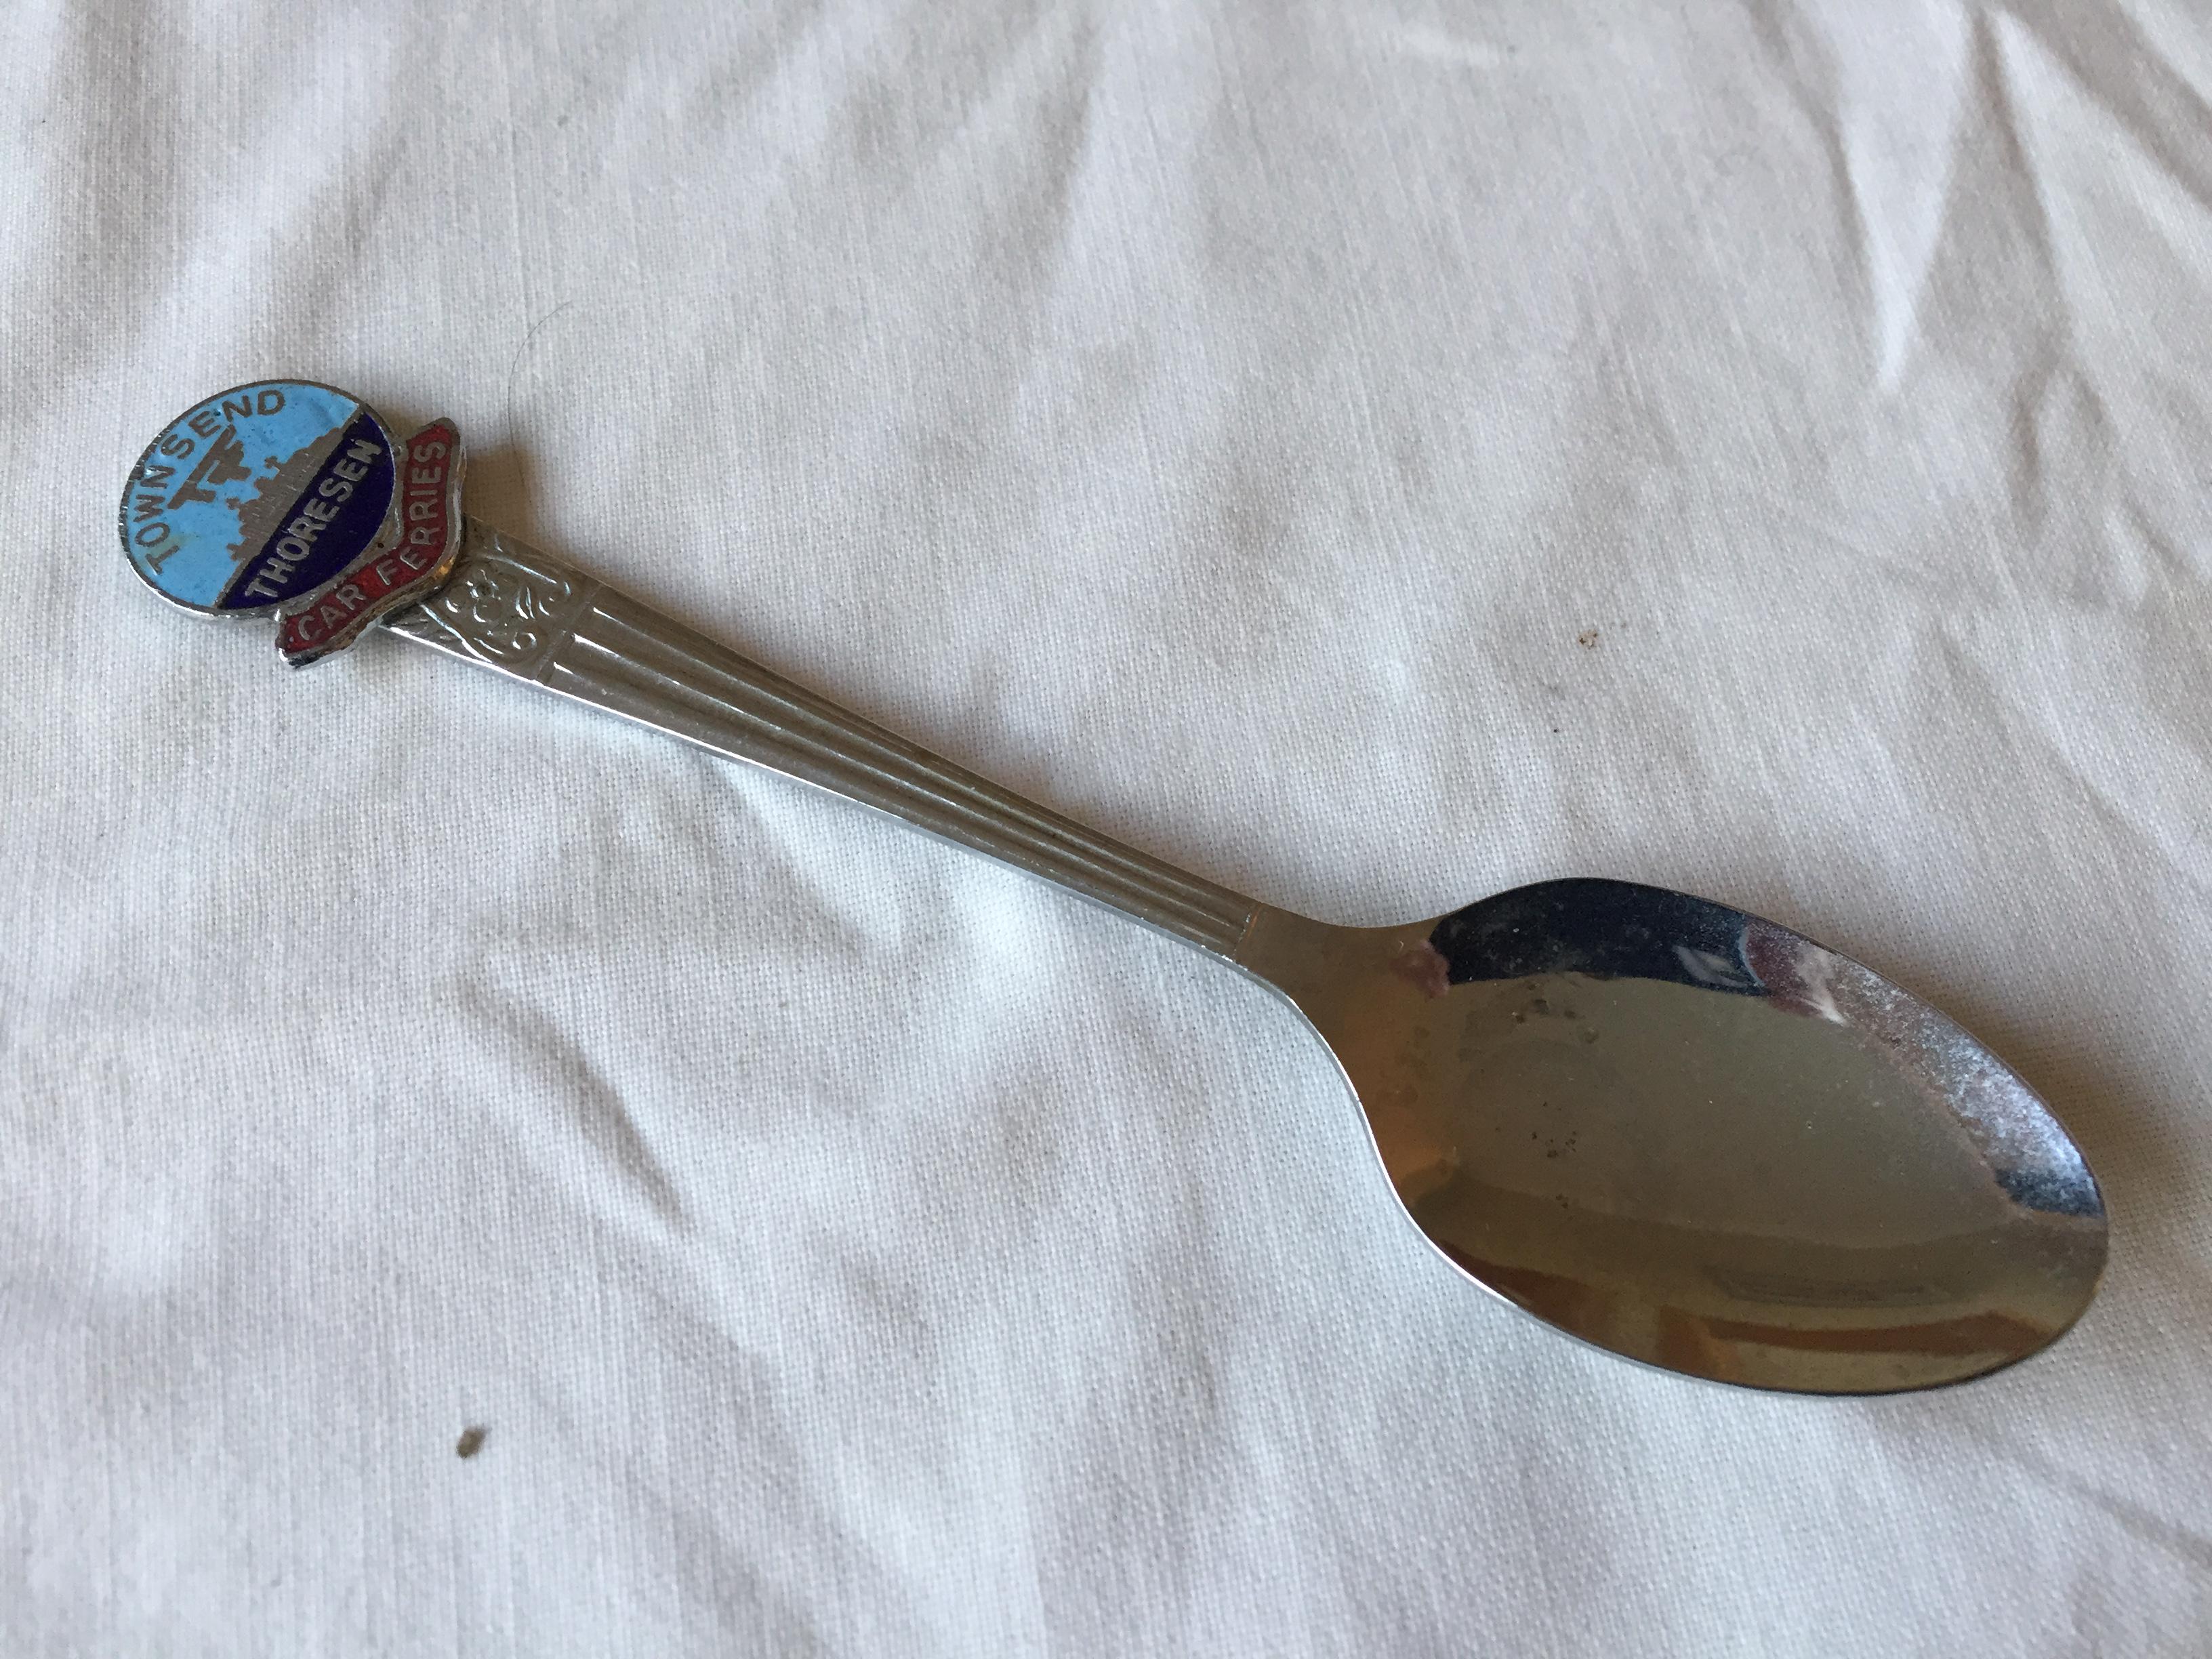 EARLY SOUVENIR SPOON FROM THE TOWNSEND THORESEN FERRIES COMPANY   